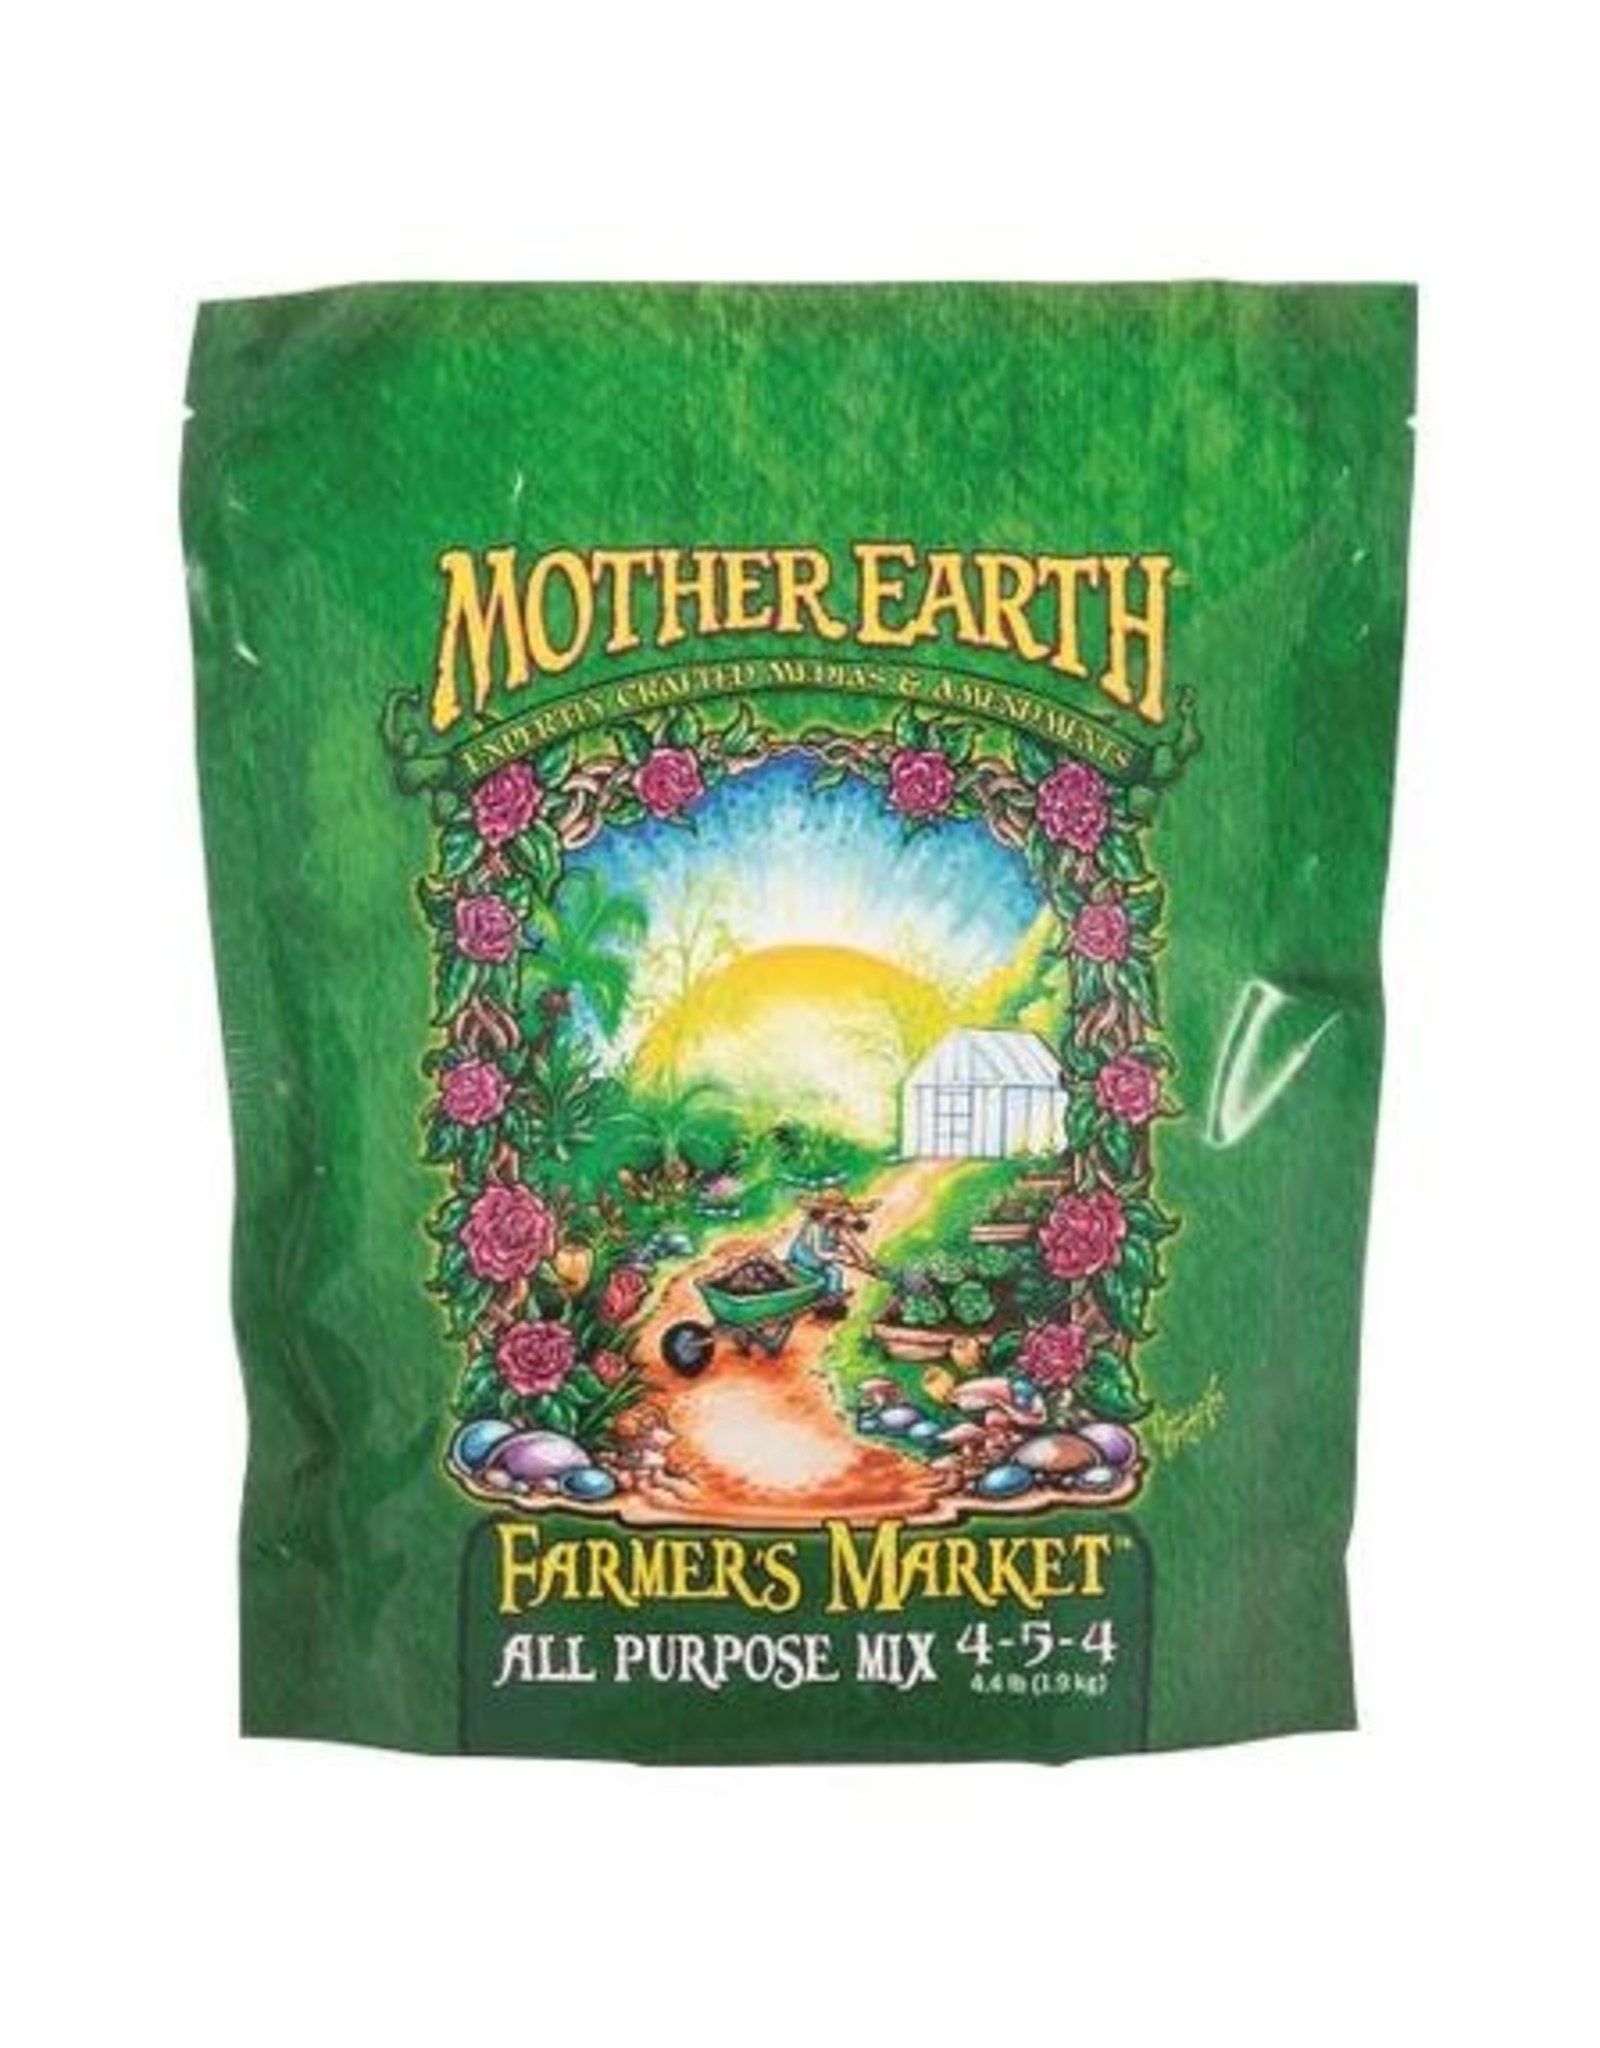 Mother Earth Mother Earth Farmer's Market All Purpose Mix 4-5-4